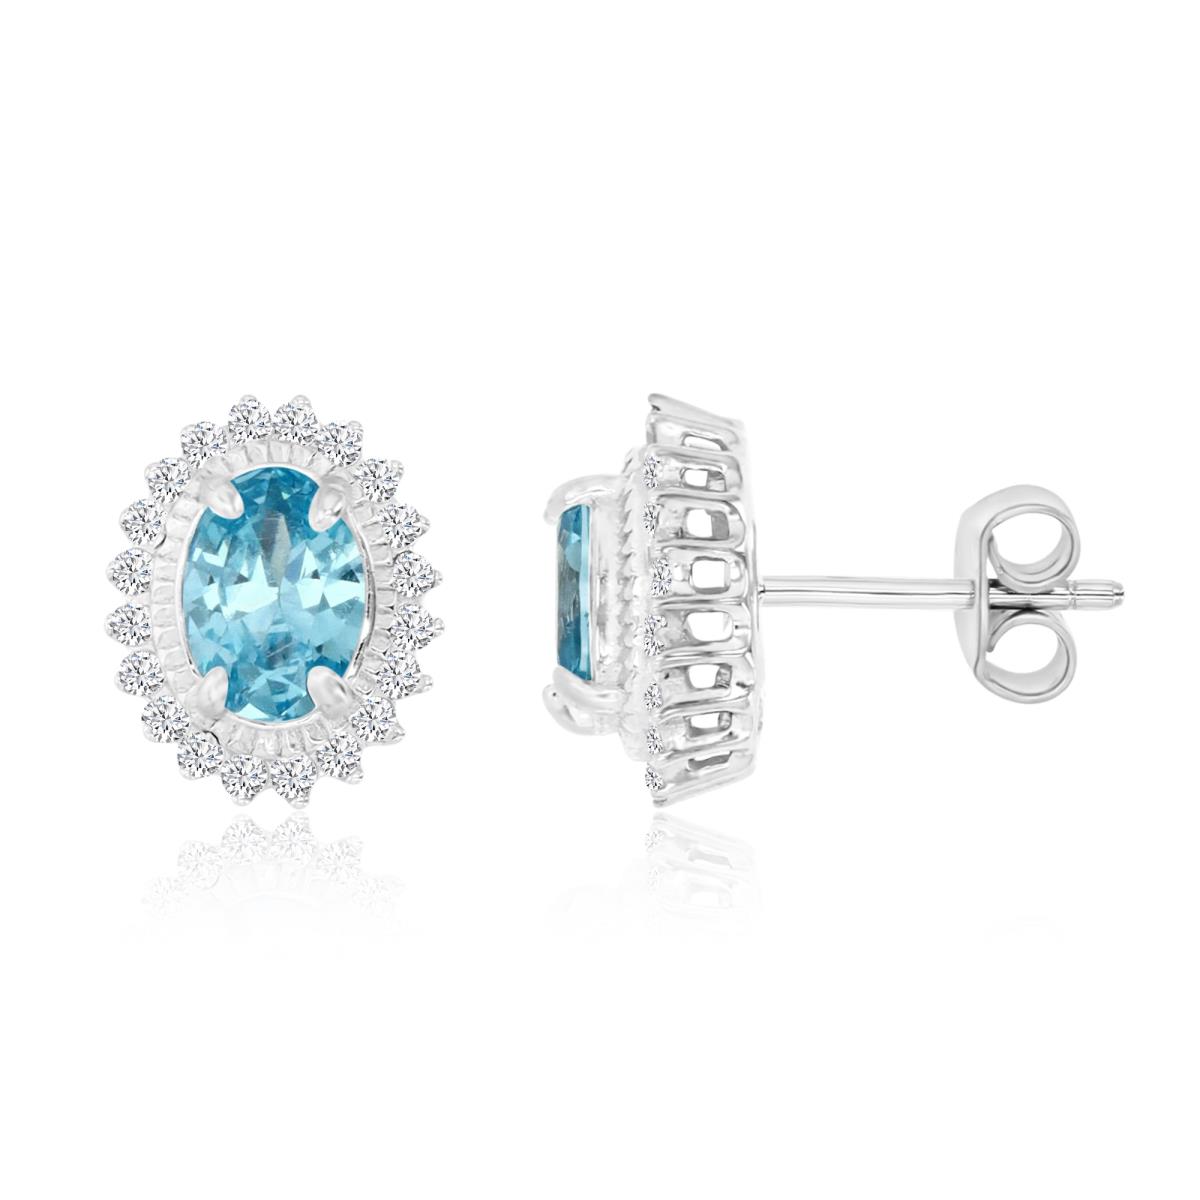 Sterling Silver Oval 7x5mm Pave Light Blue & White CZ Halo Stud Earrings